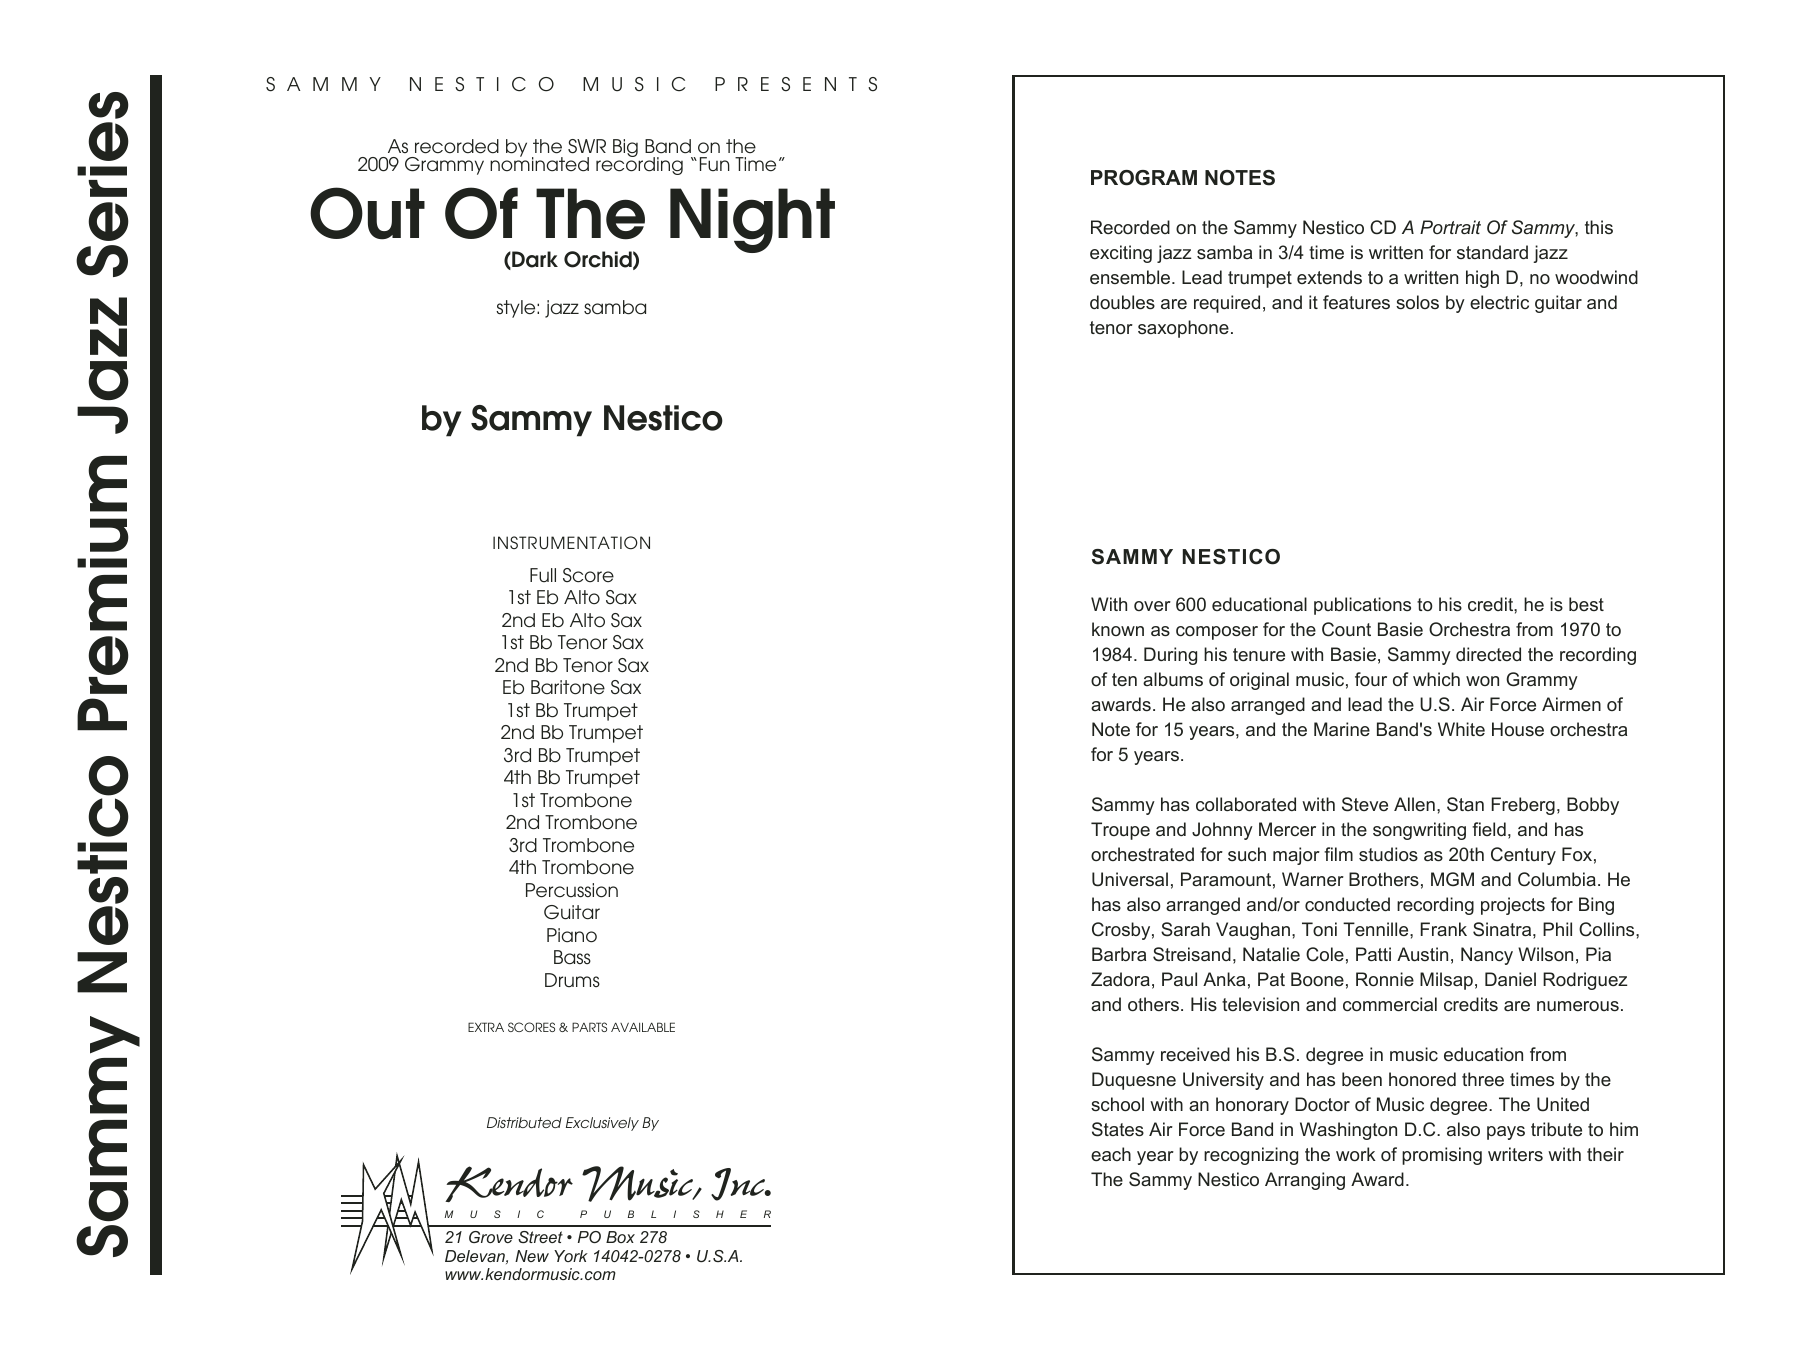 Download Sammy Nestico Out of the Night - Full Score Sheet Music